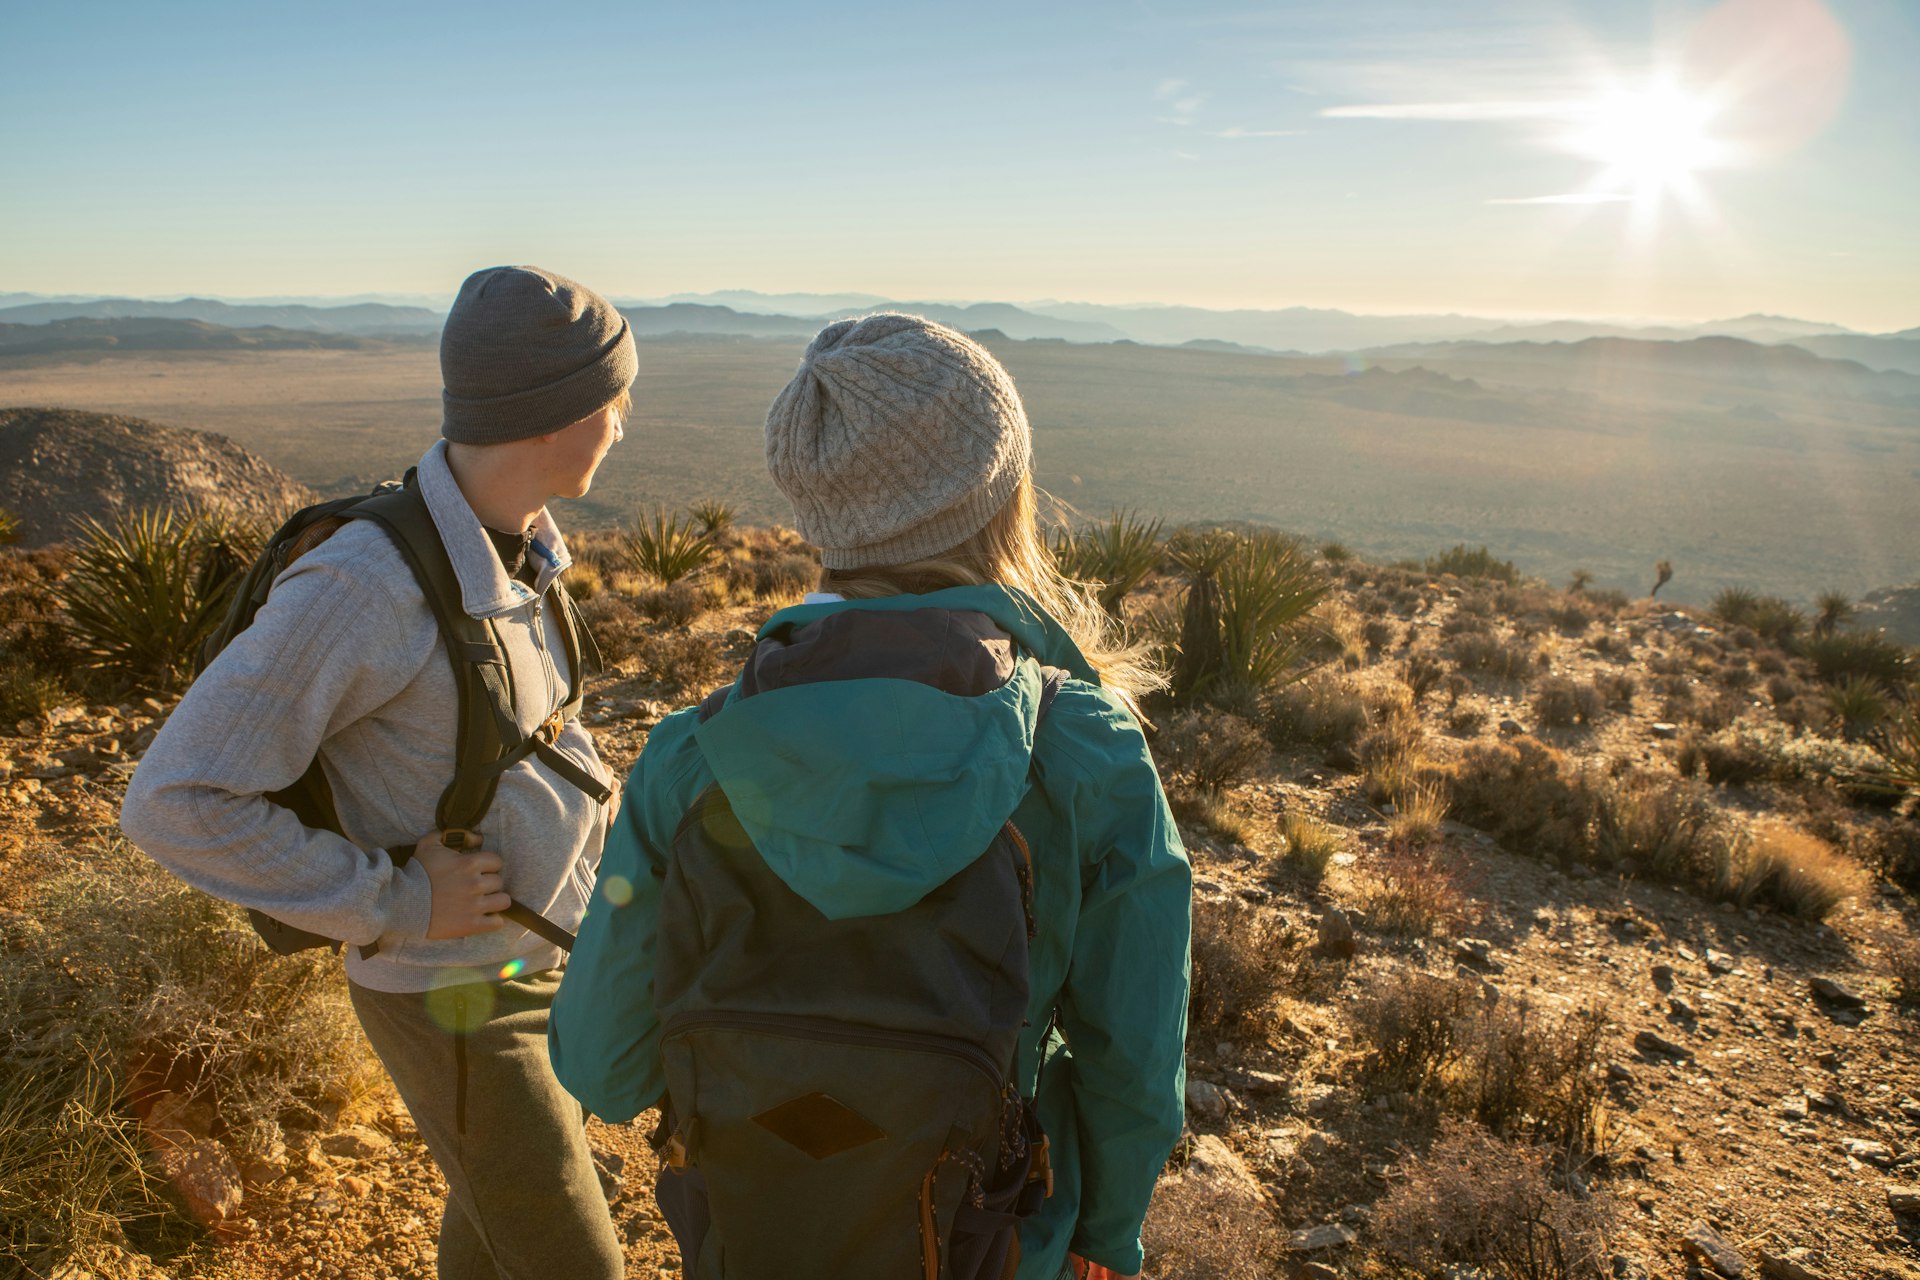 Hikers looking out over California mountains and valleys